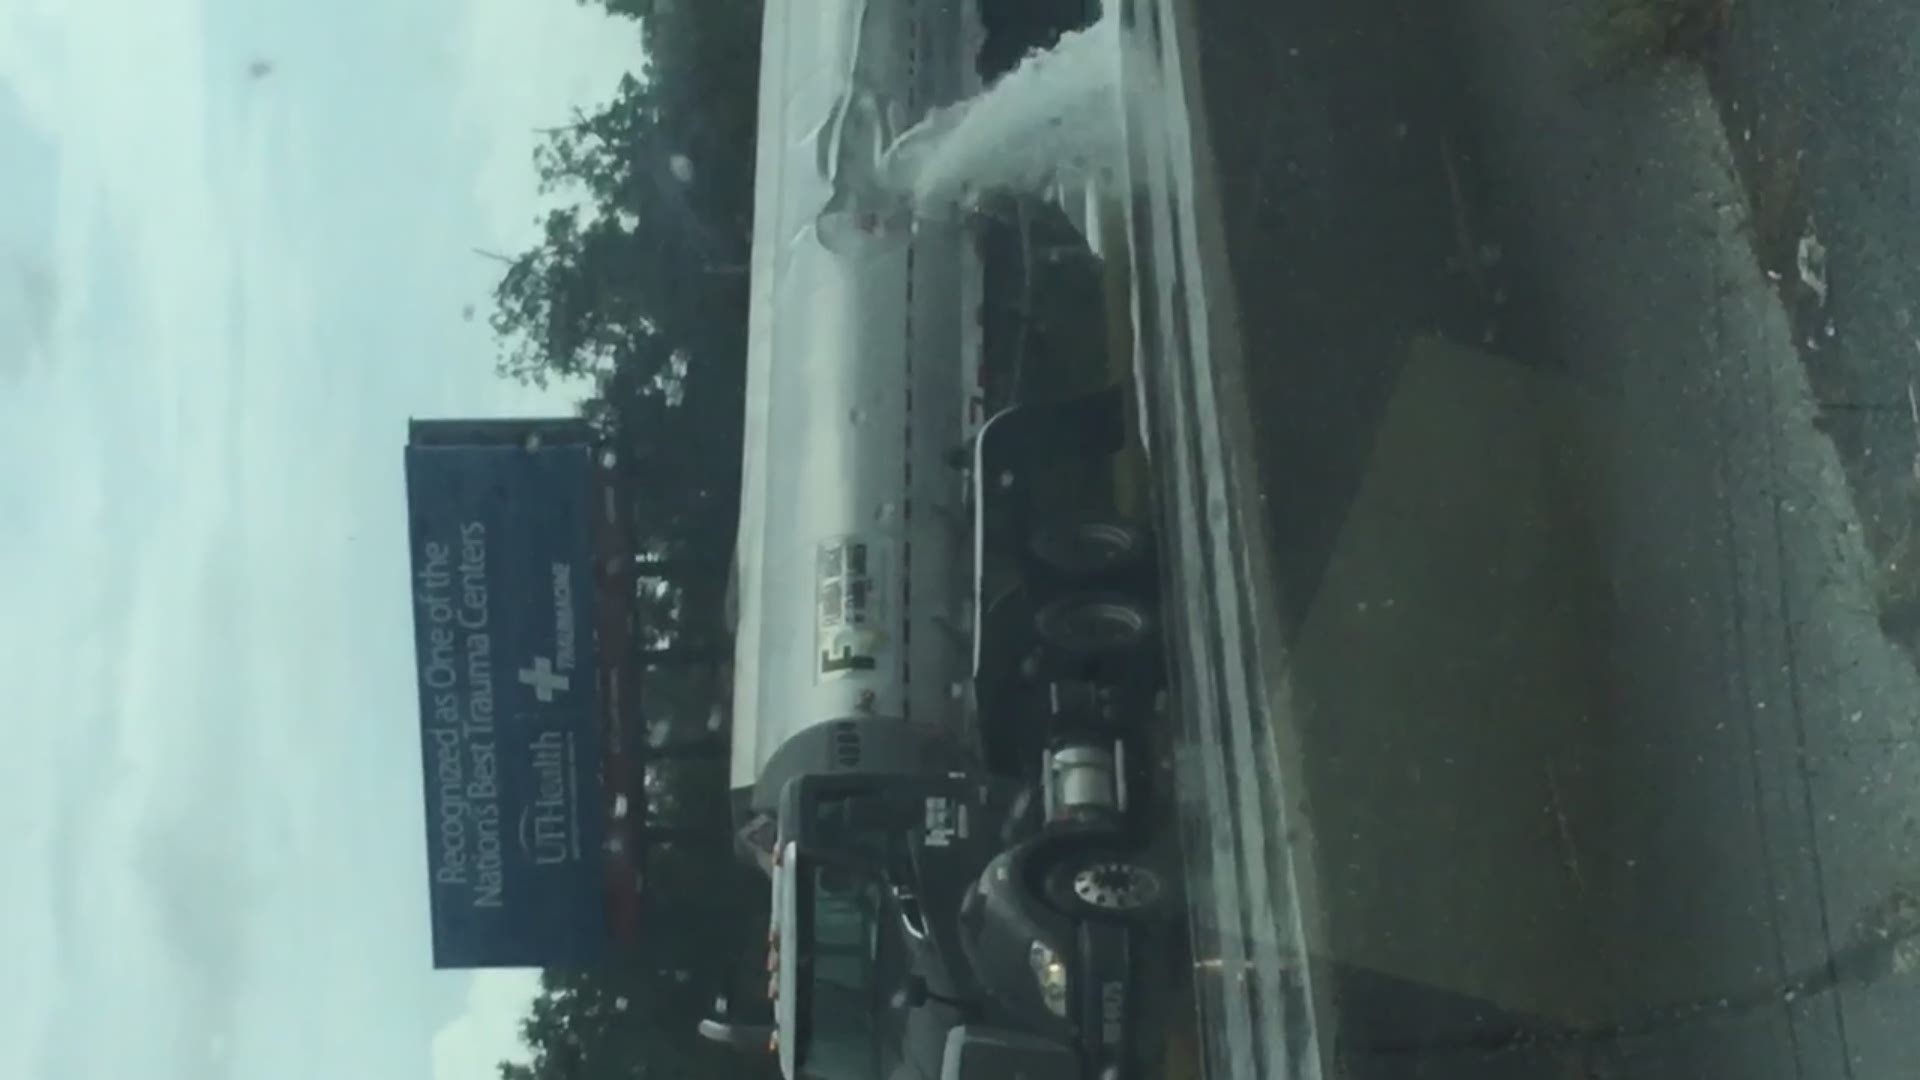 A fuel tanker spilled much of its load Tuesday on Interstate 95 in Jacksonville.